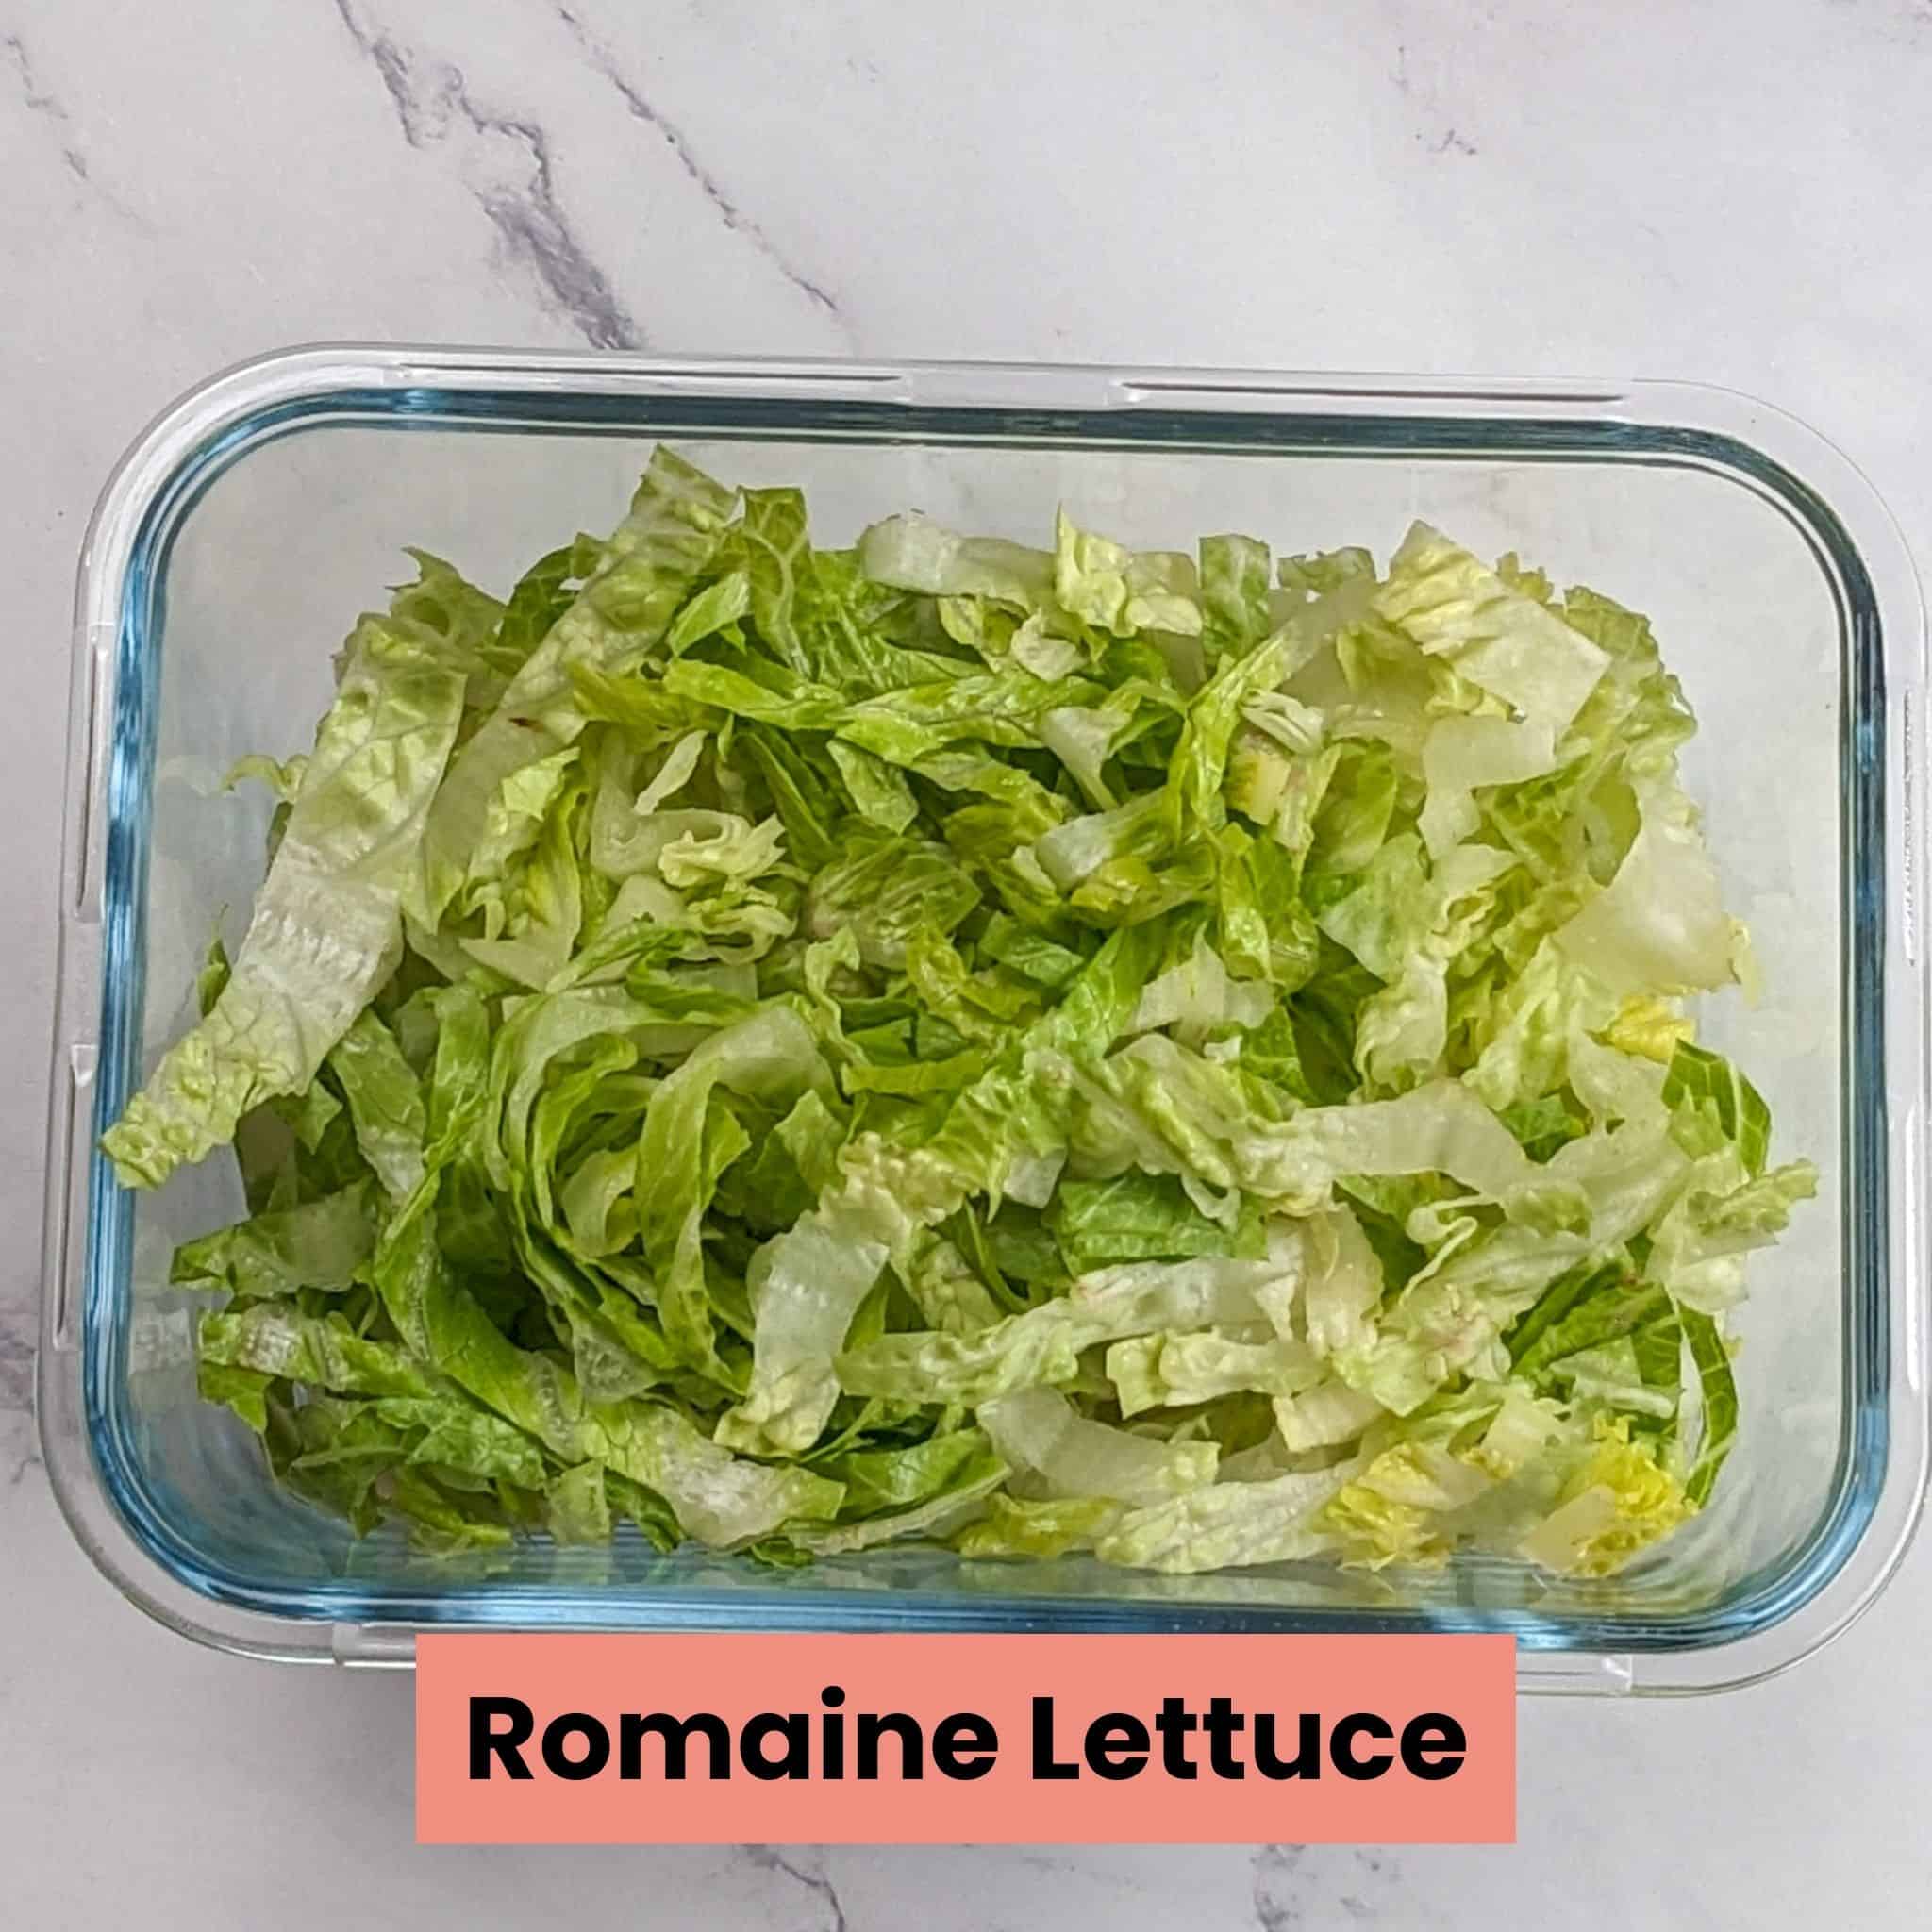 shredded romaine lettuces in a deep glass rectangle container.